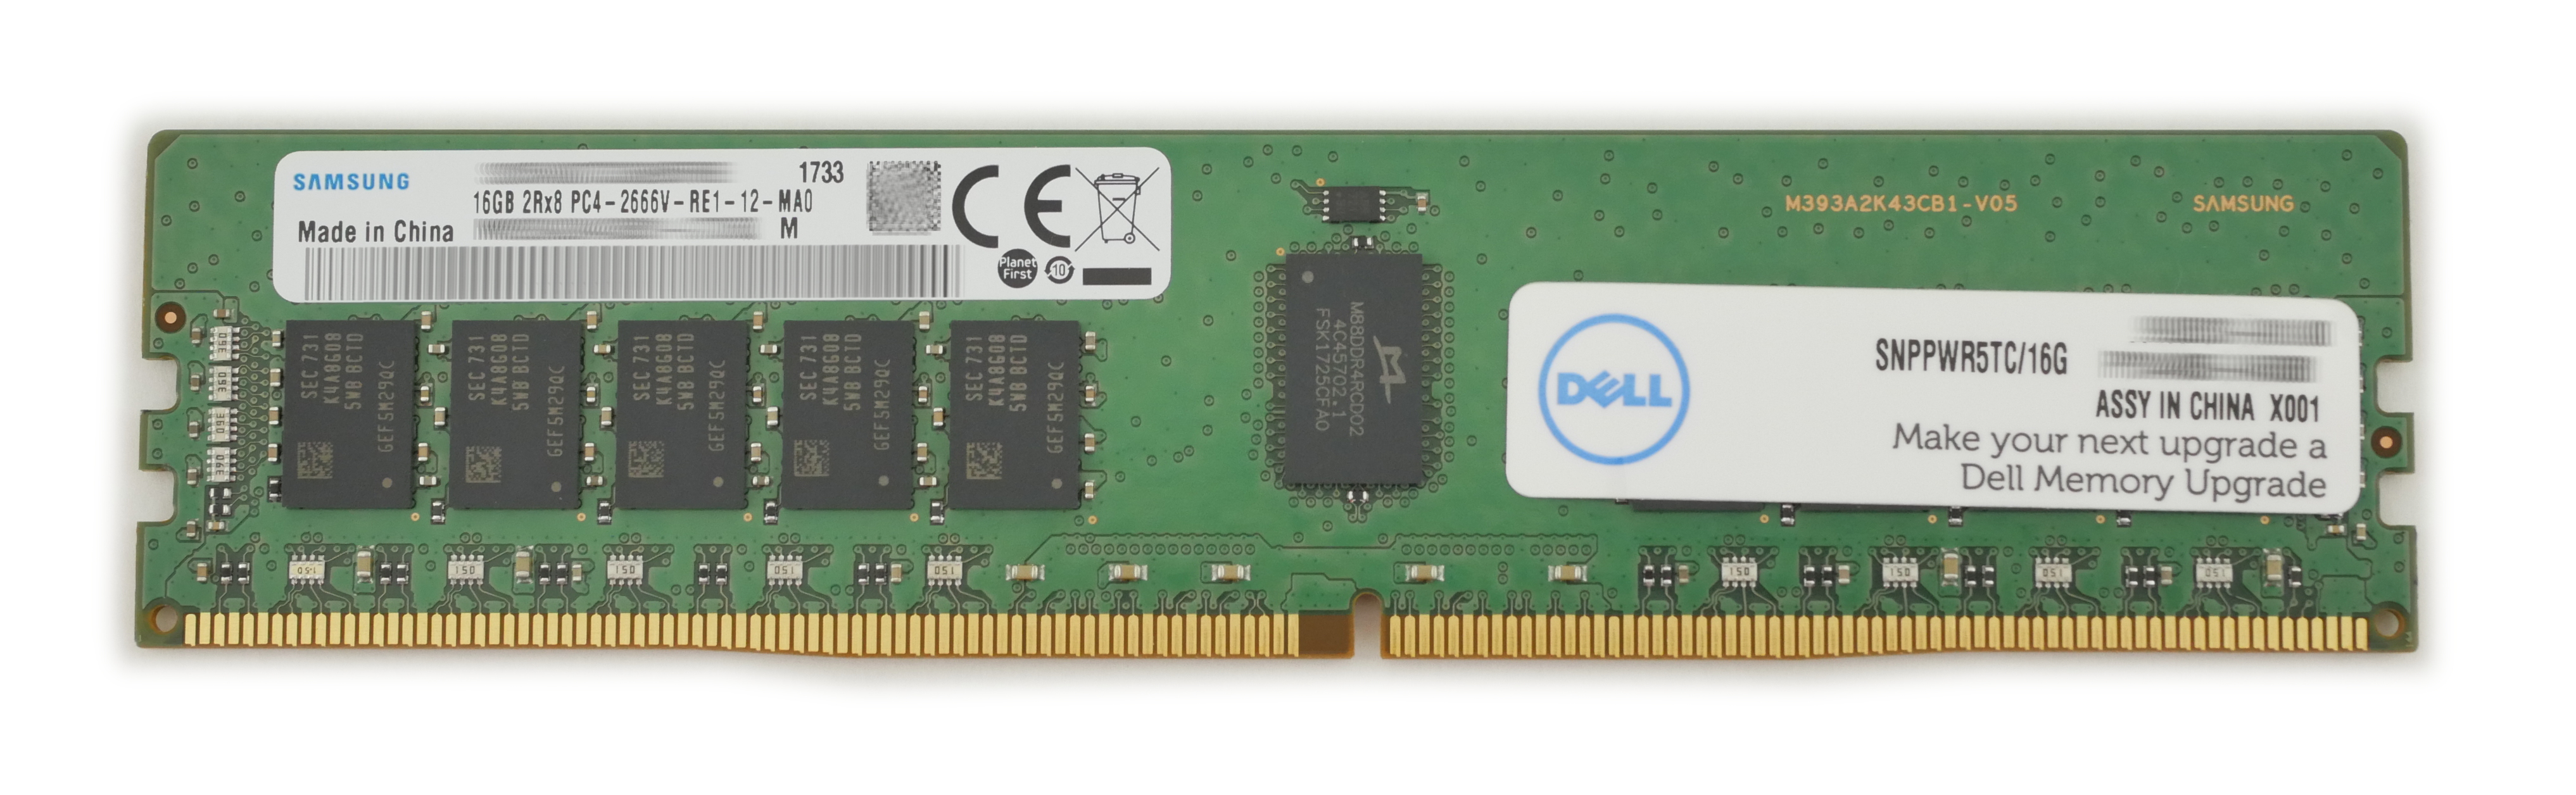 Dell 16GB 2rx8 DDR4 Rdimm Memory RAM 2666mhz SNPPWR5TC/16G - Click Image to Close